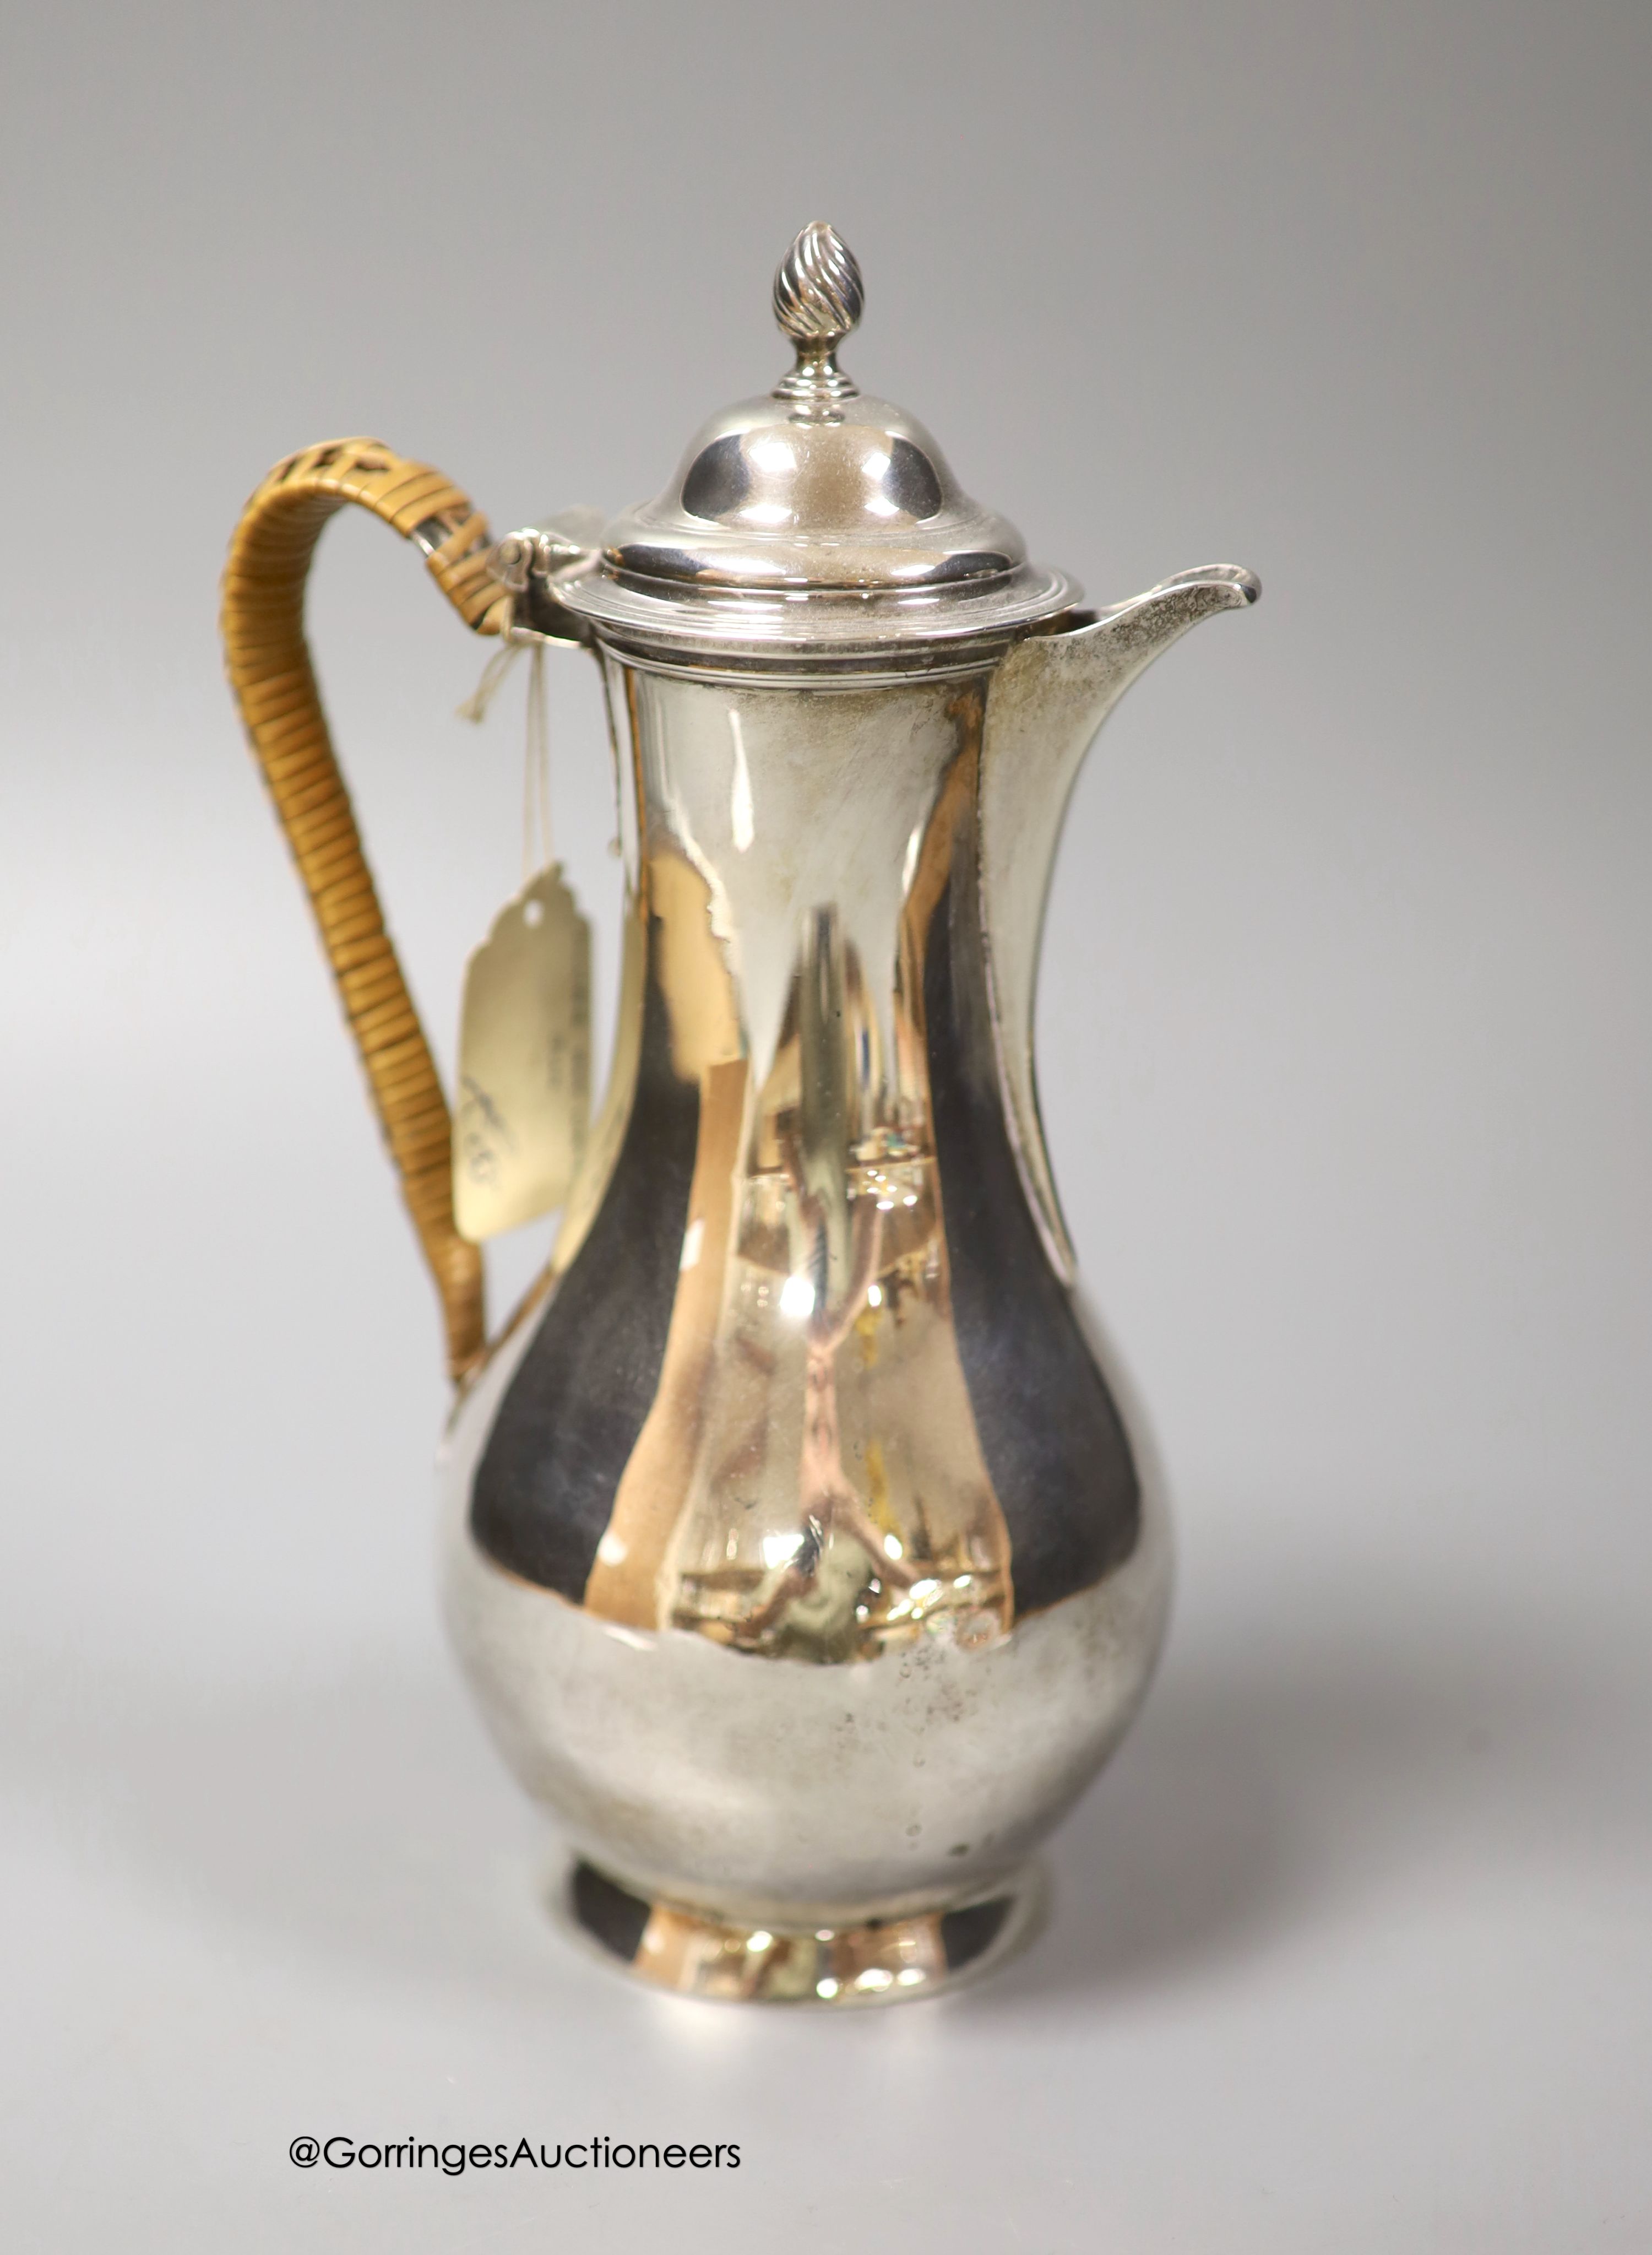 A George III silver baluster hot water pot, Charles Wright, London, 1771, height 21.7cm, gross weight 11.5oz